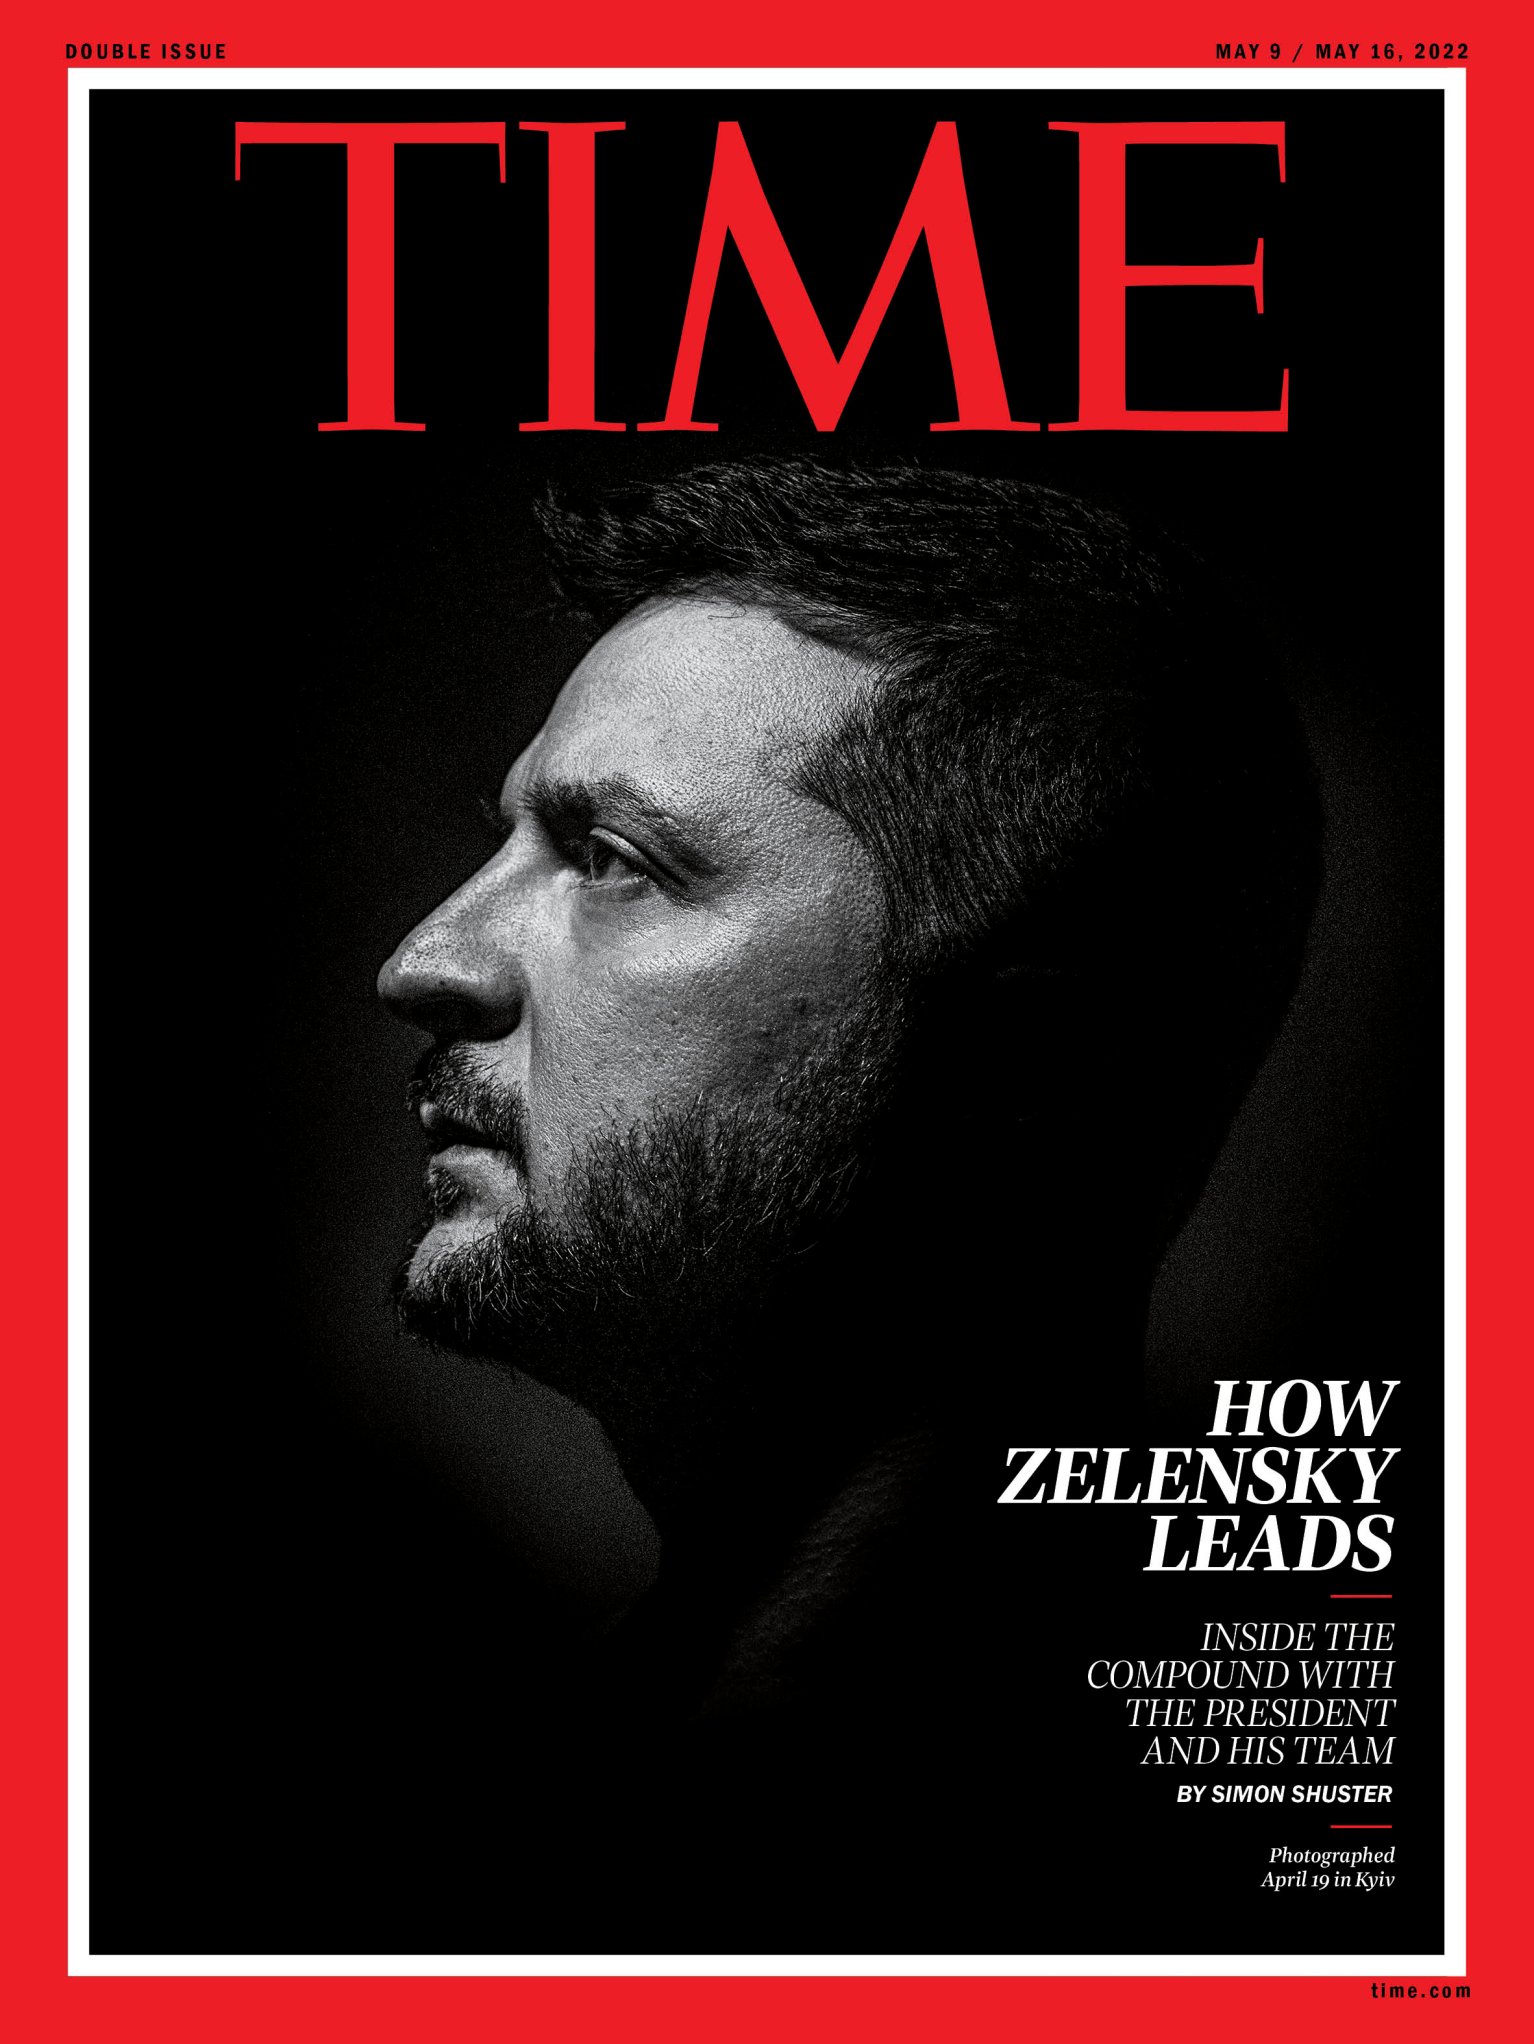 TIME - “How Zelensky Leads” May 9/May 16, 2022